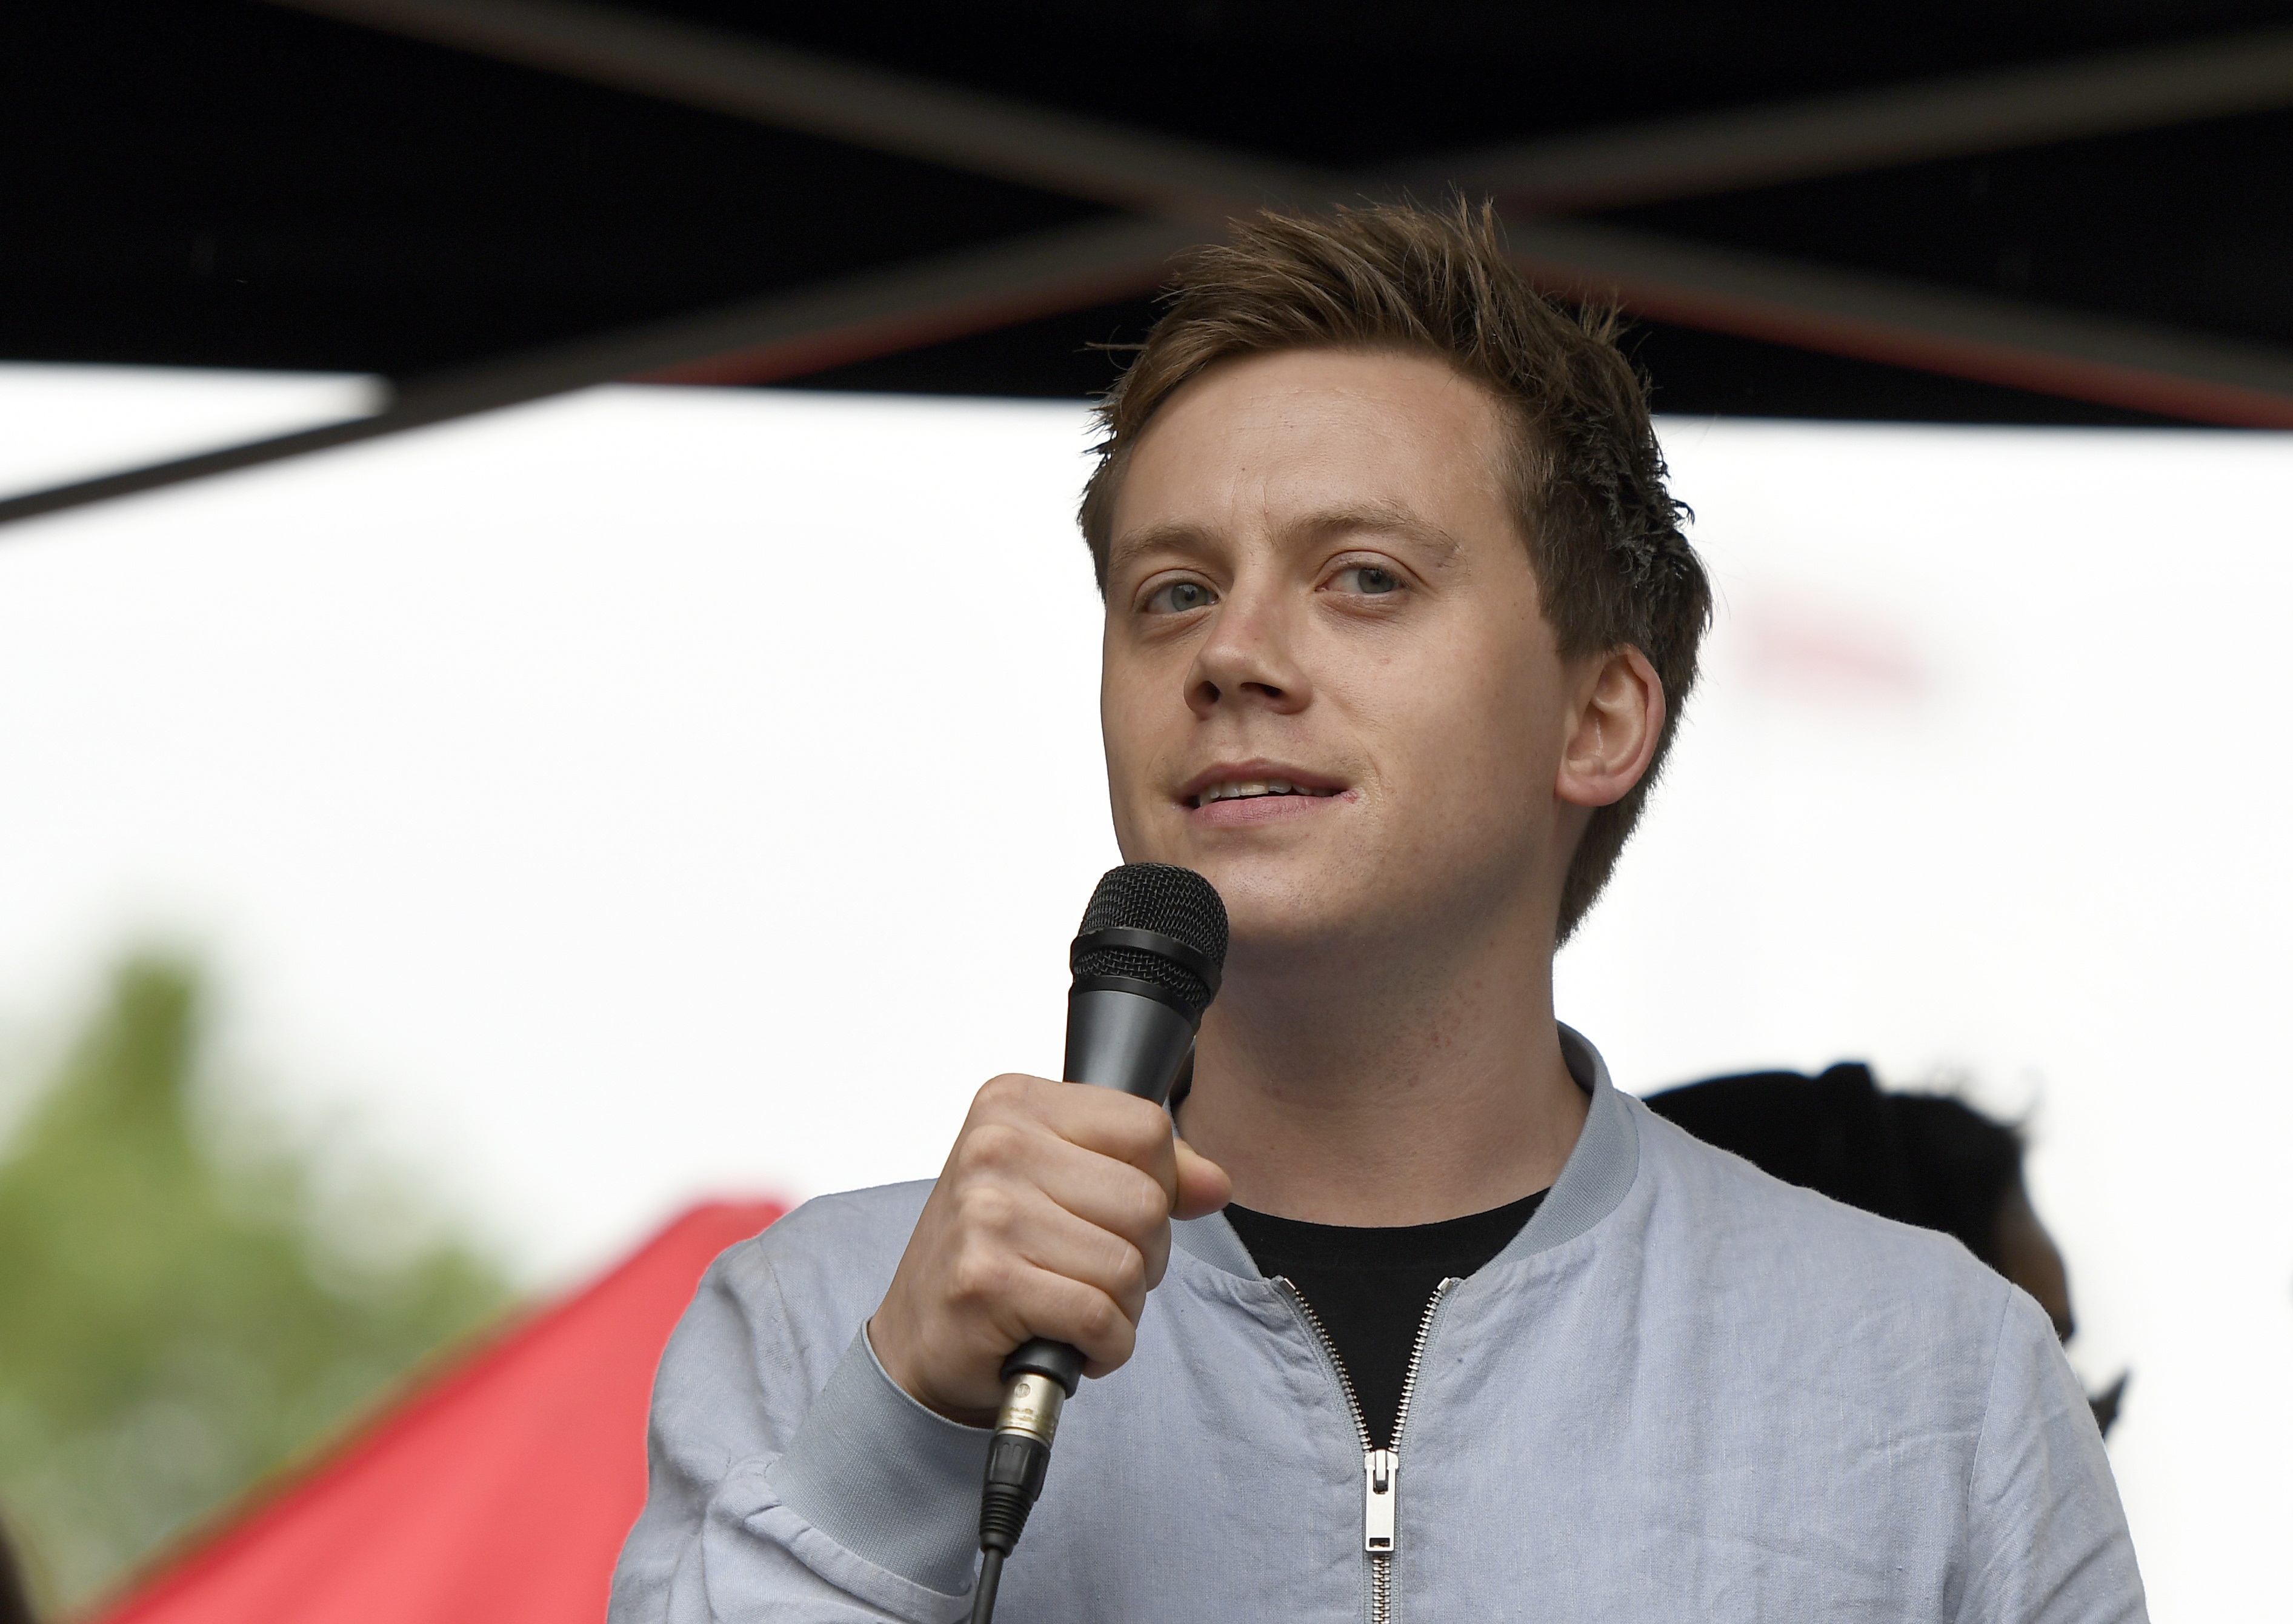 Guardian columnist Owen Jones speaks to the crowd during an Anti-Trump protest in London.